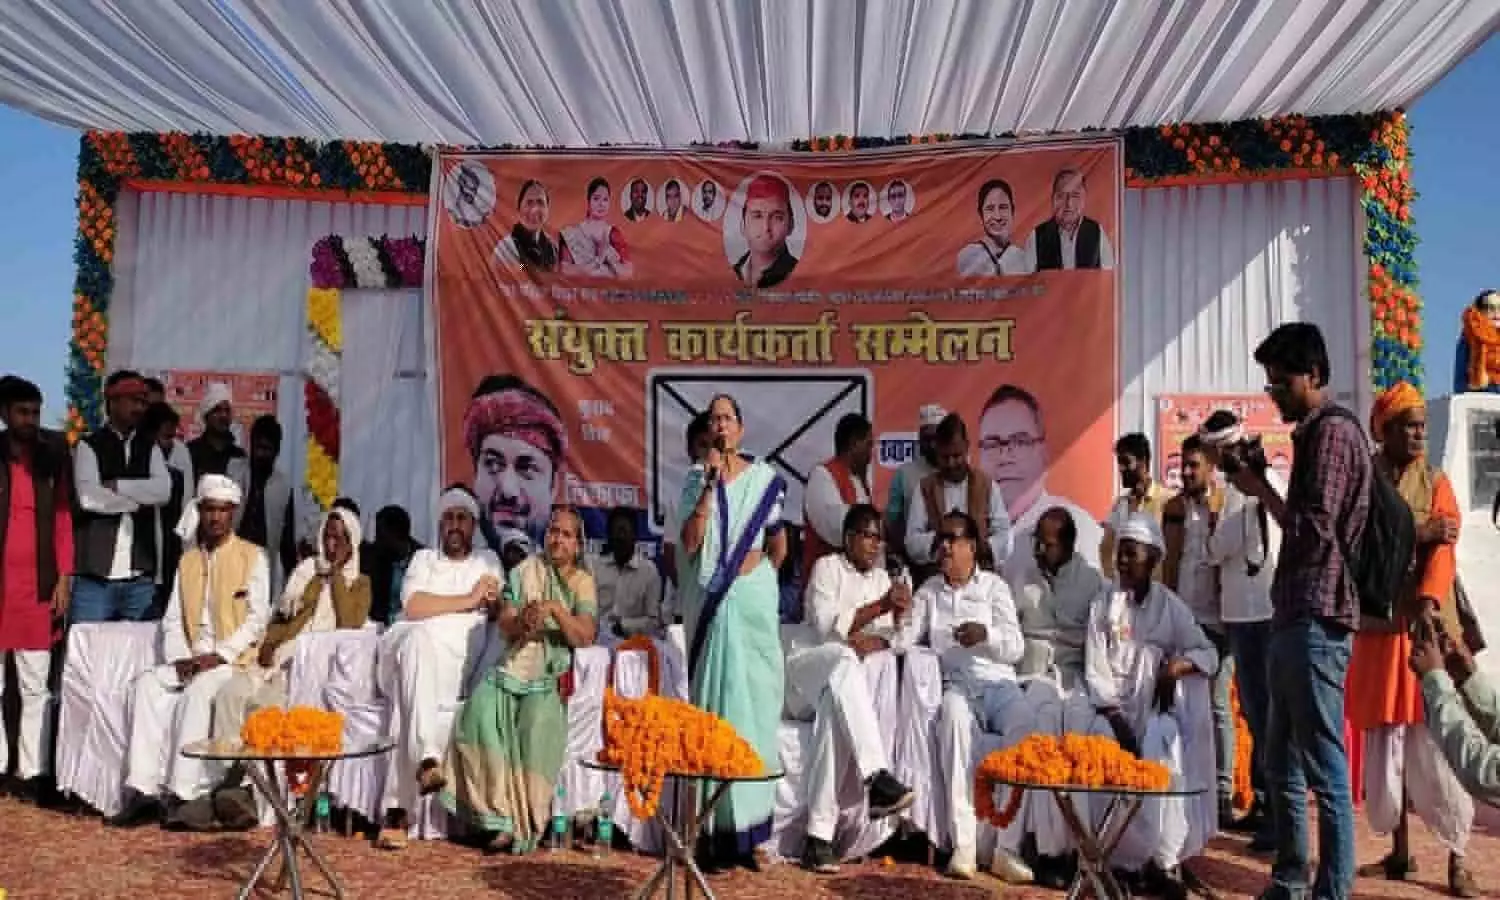 UP Election 2022: Krishna Patel shouts in support of Apna Dal comralist candidate